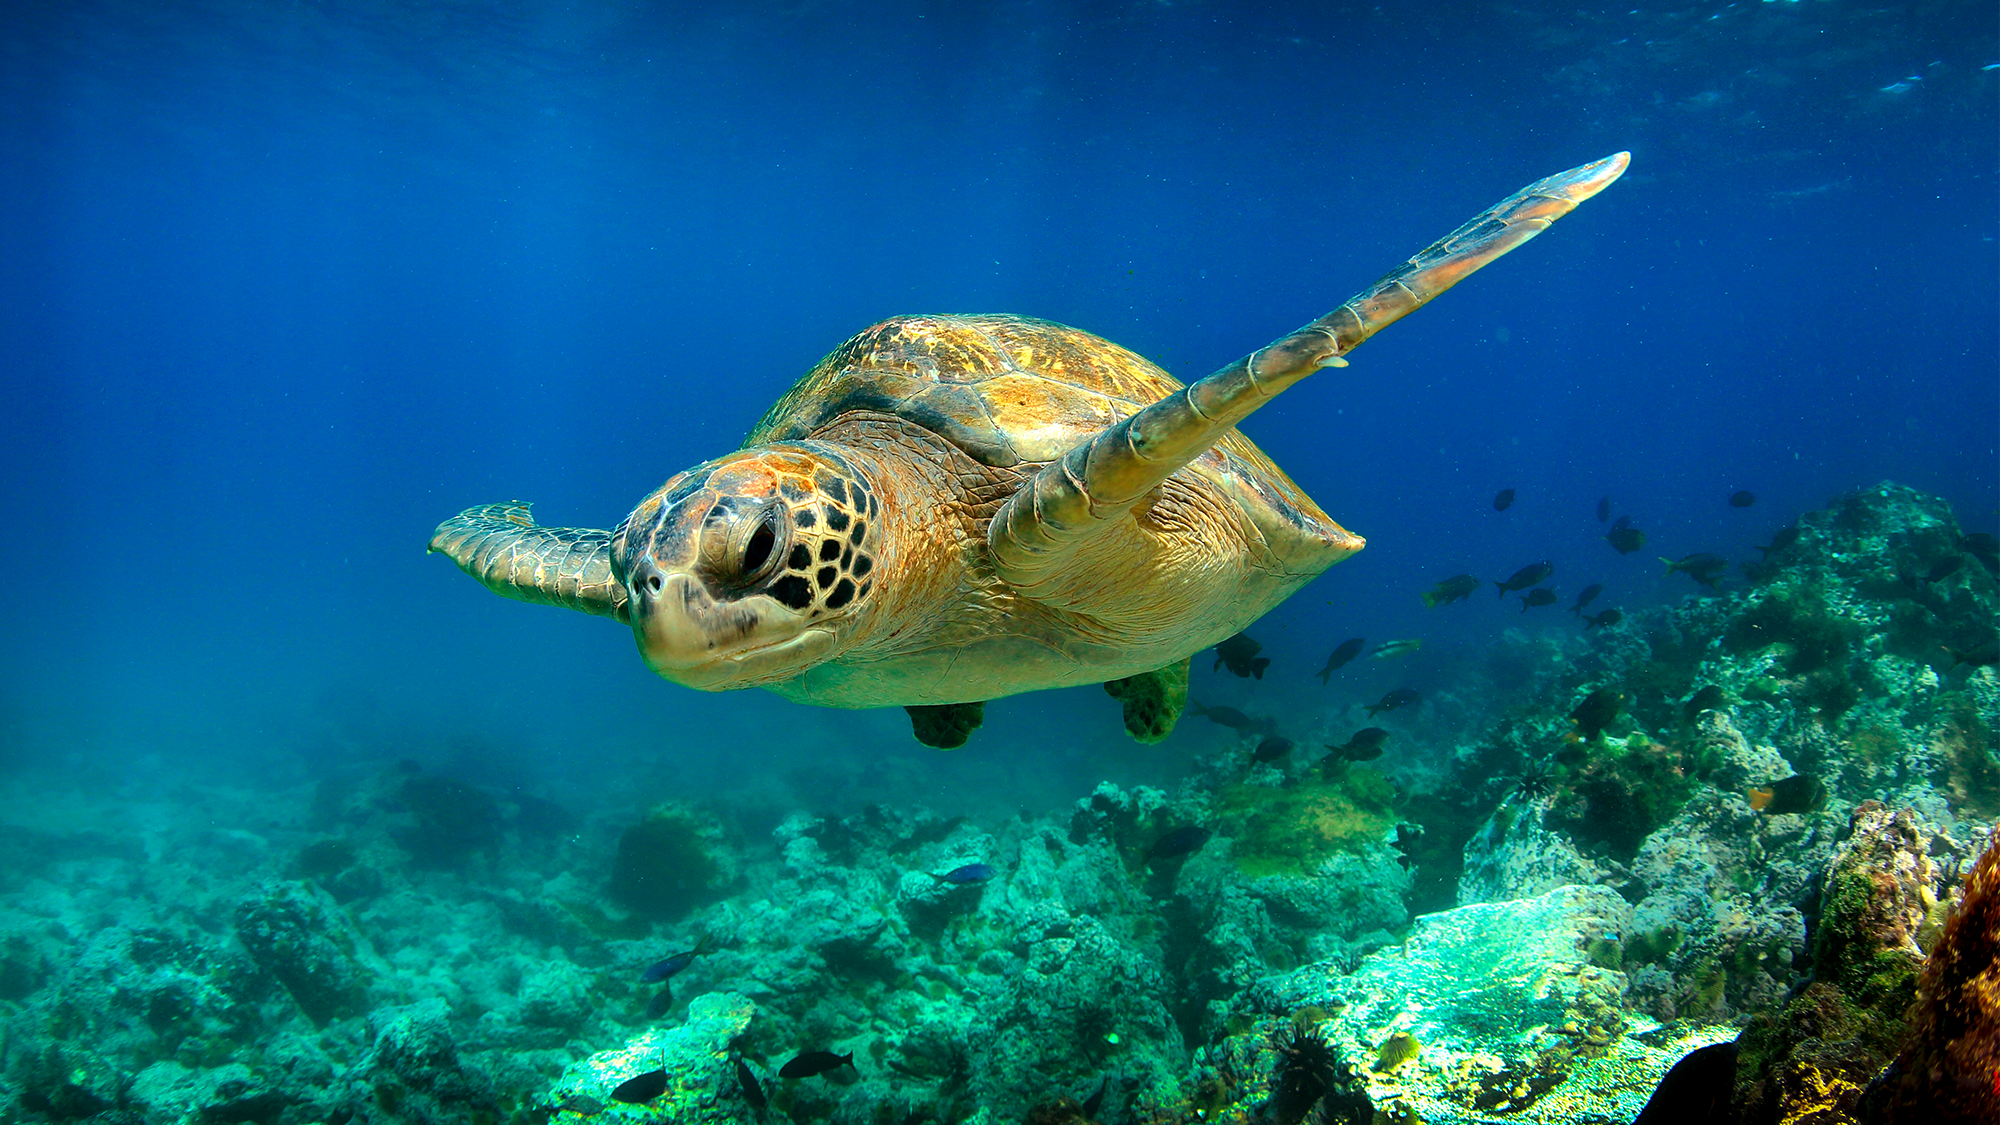 Hungry green sea turtles have eaten in the same seagrass meadows for about 3,000 years